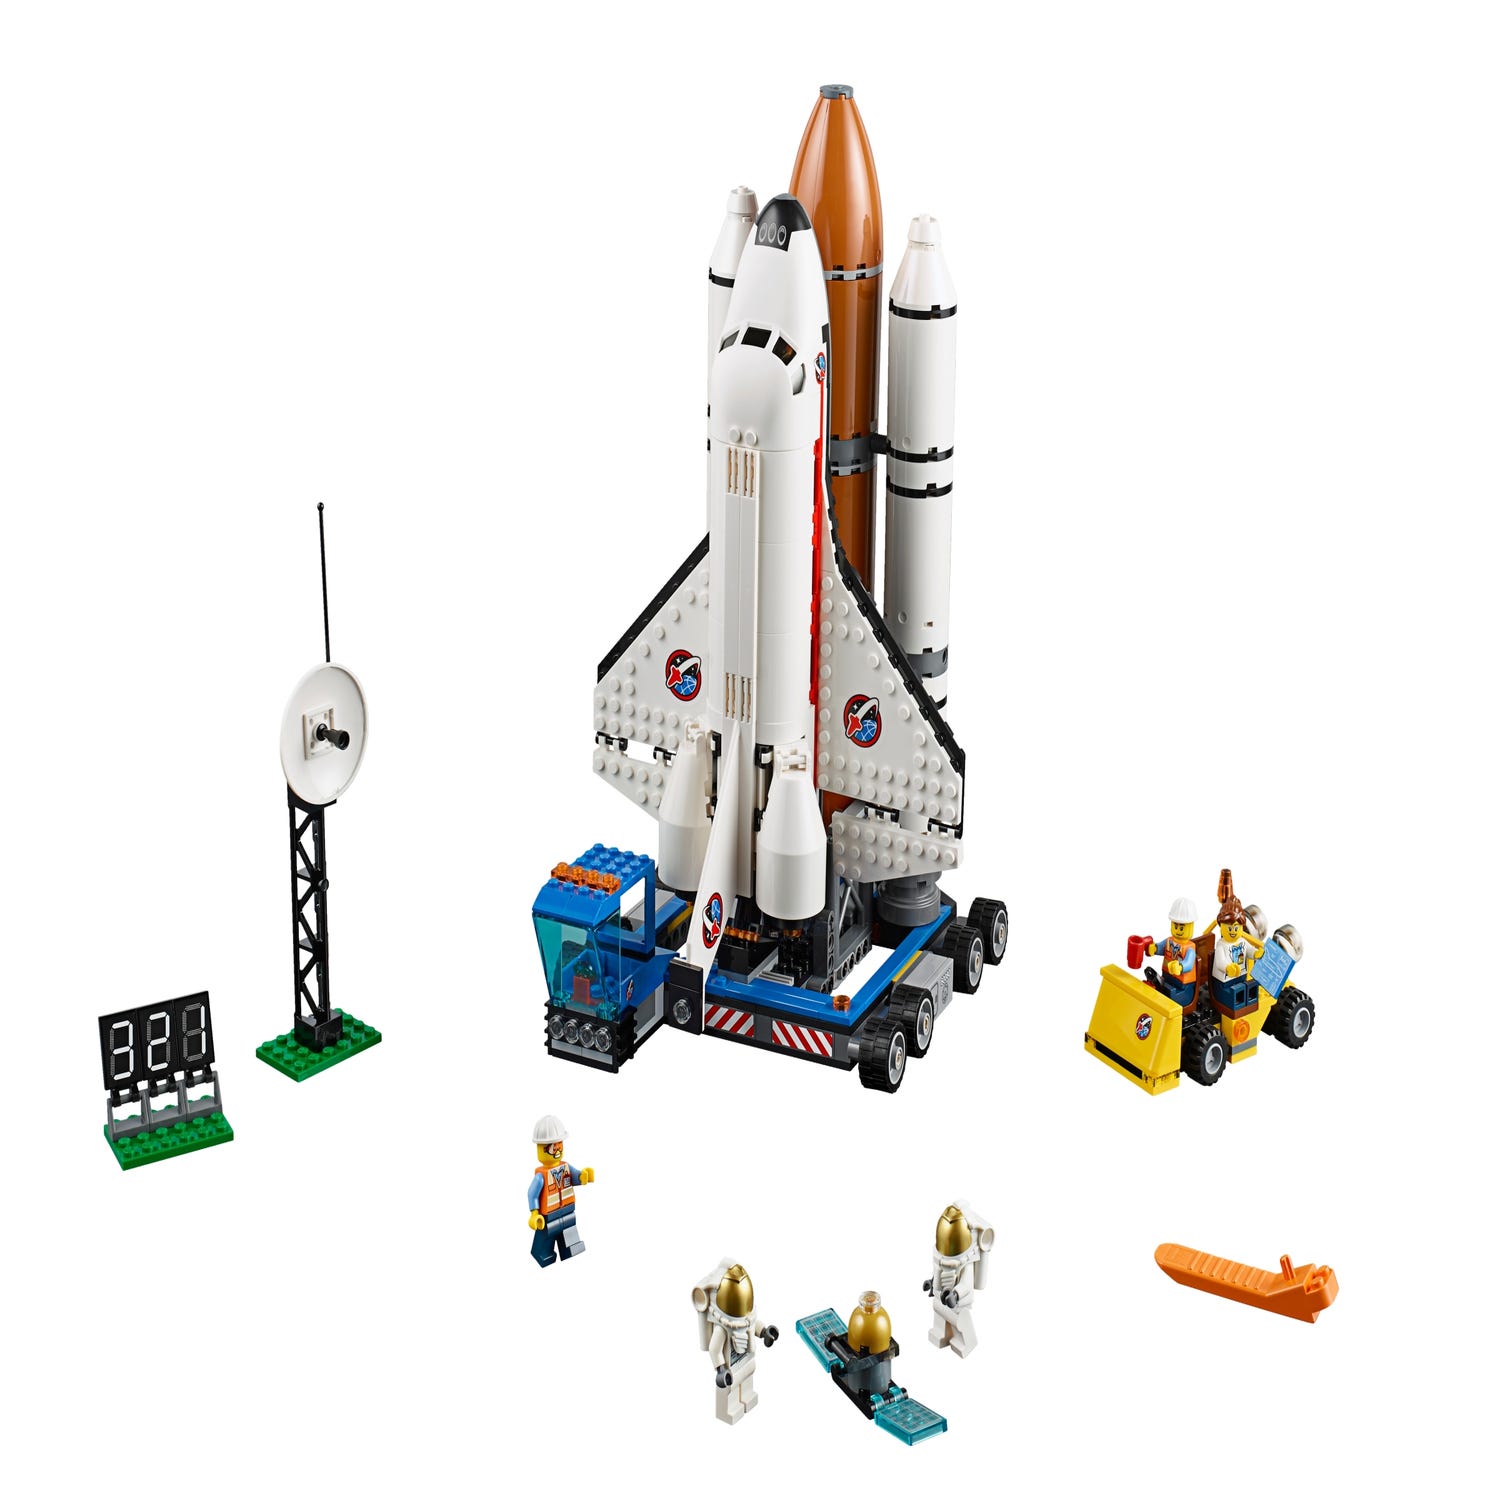 60080 | City | Buy online at the Official LEGO®